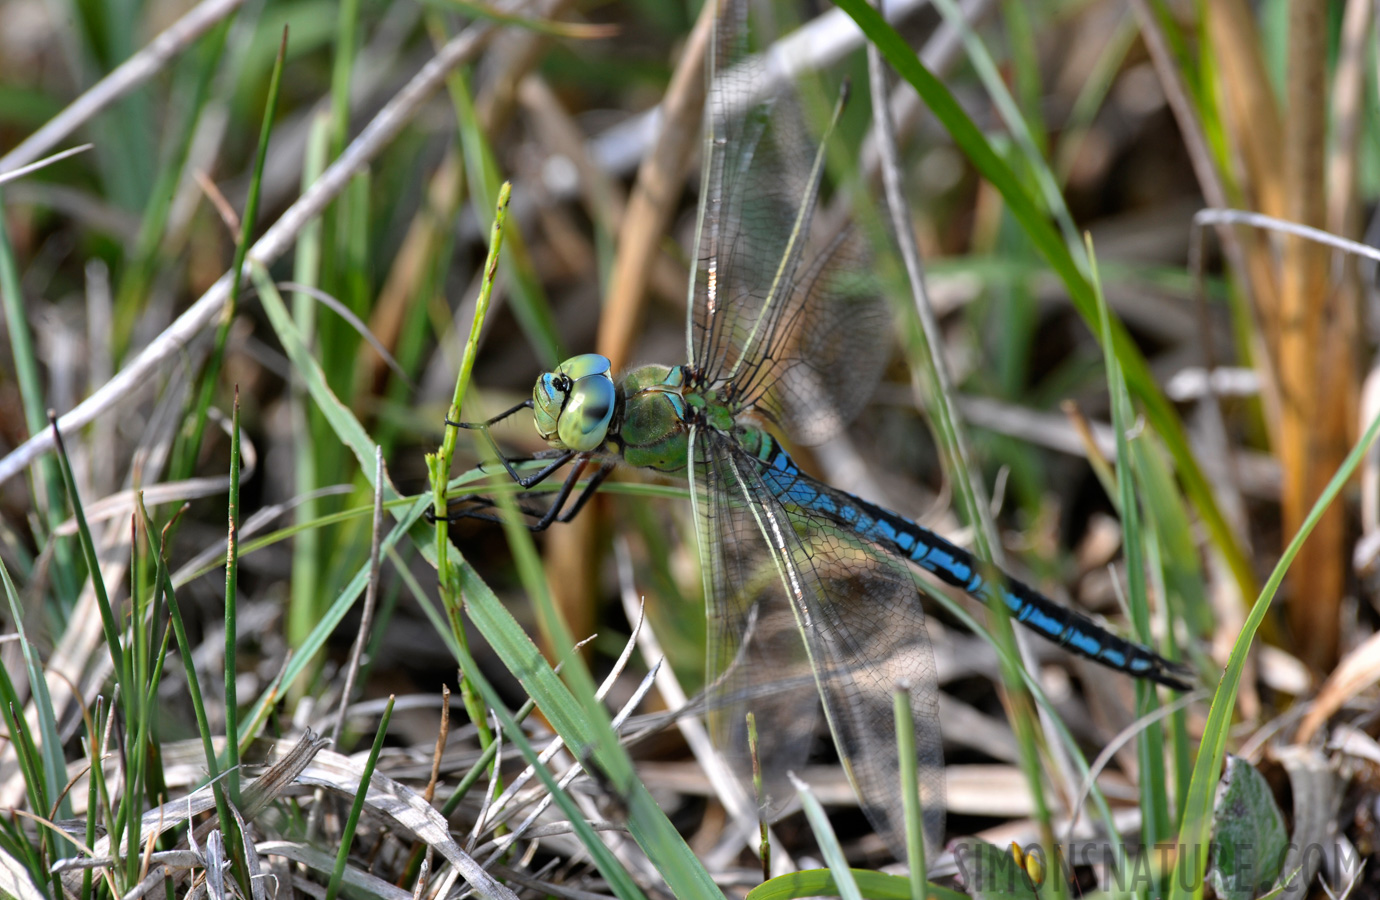 Anax imperator [550 mm, 1/125 sec at f / 11, ISO 400]